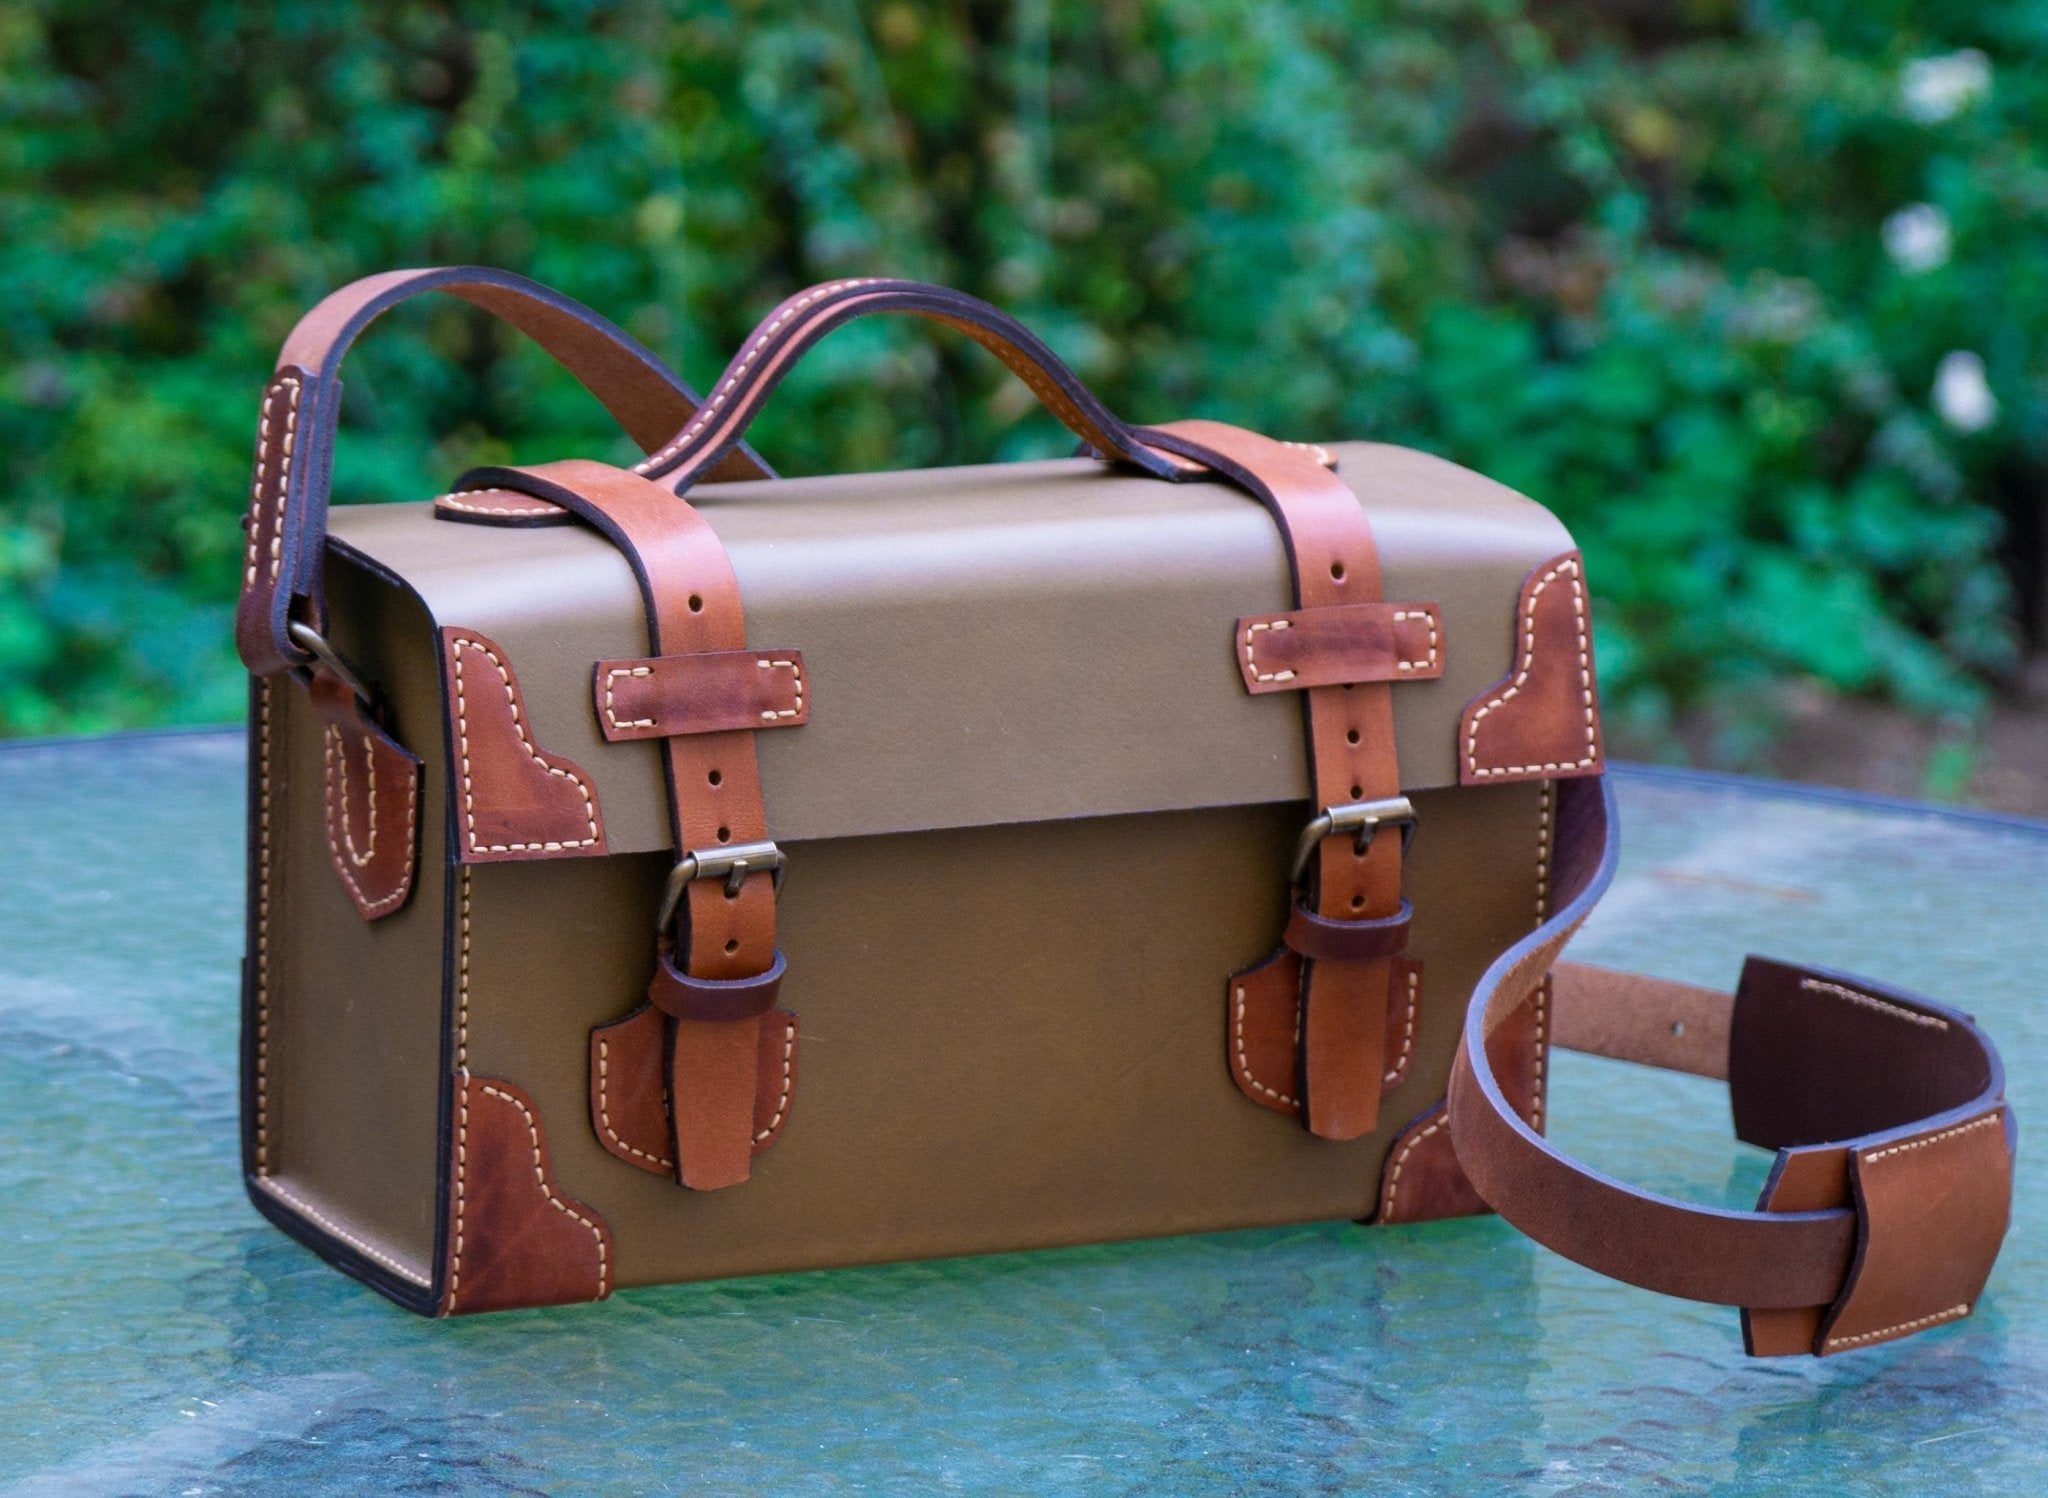 Heavy Duty Tool Bag, Leather Tool Bag PDF Pattern and Instructional Video  by Vasile and Pavel